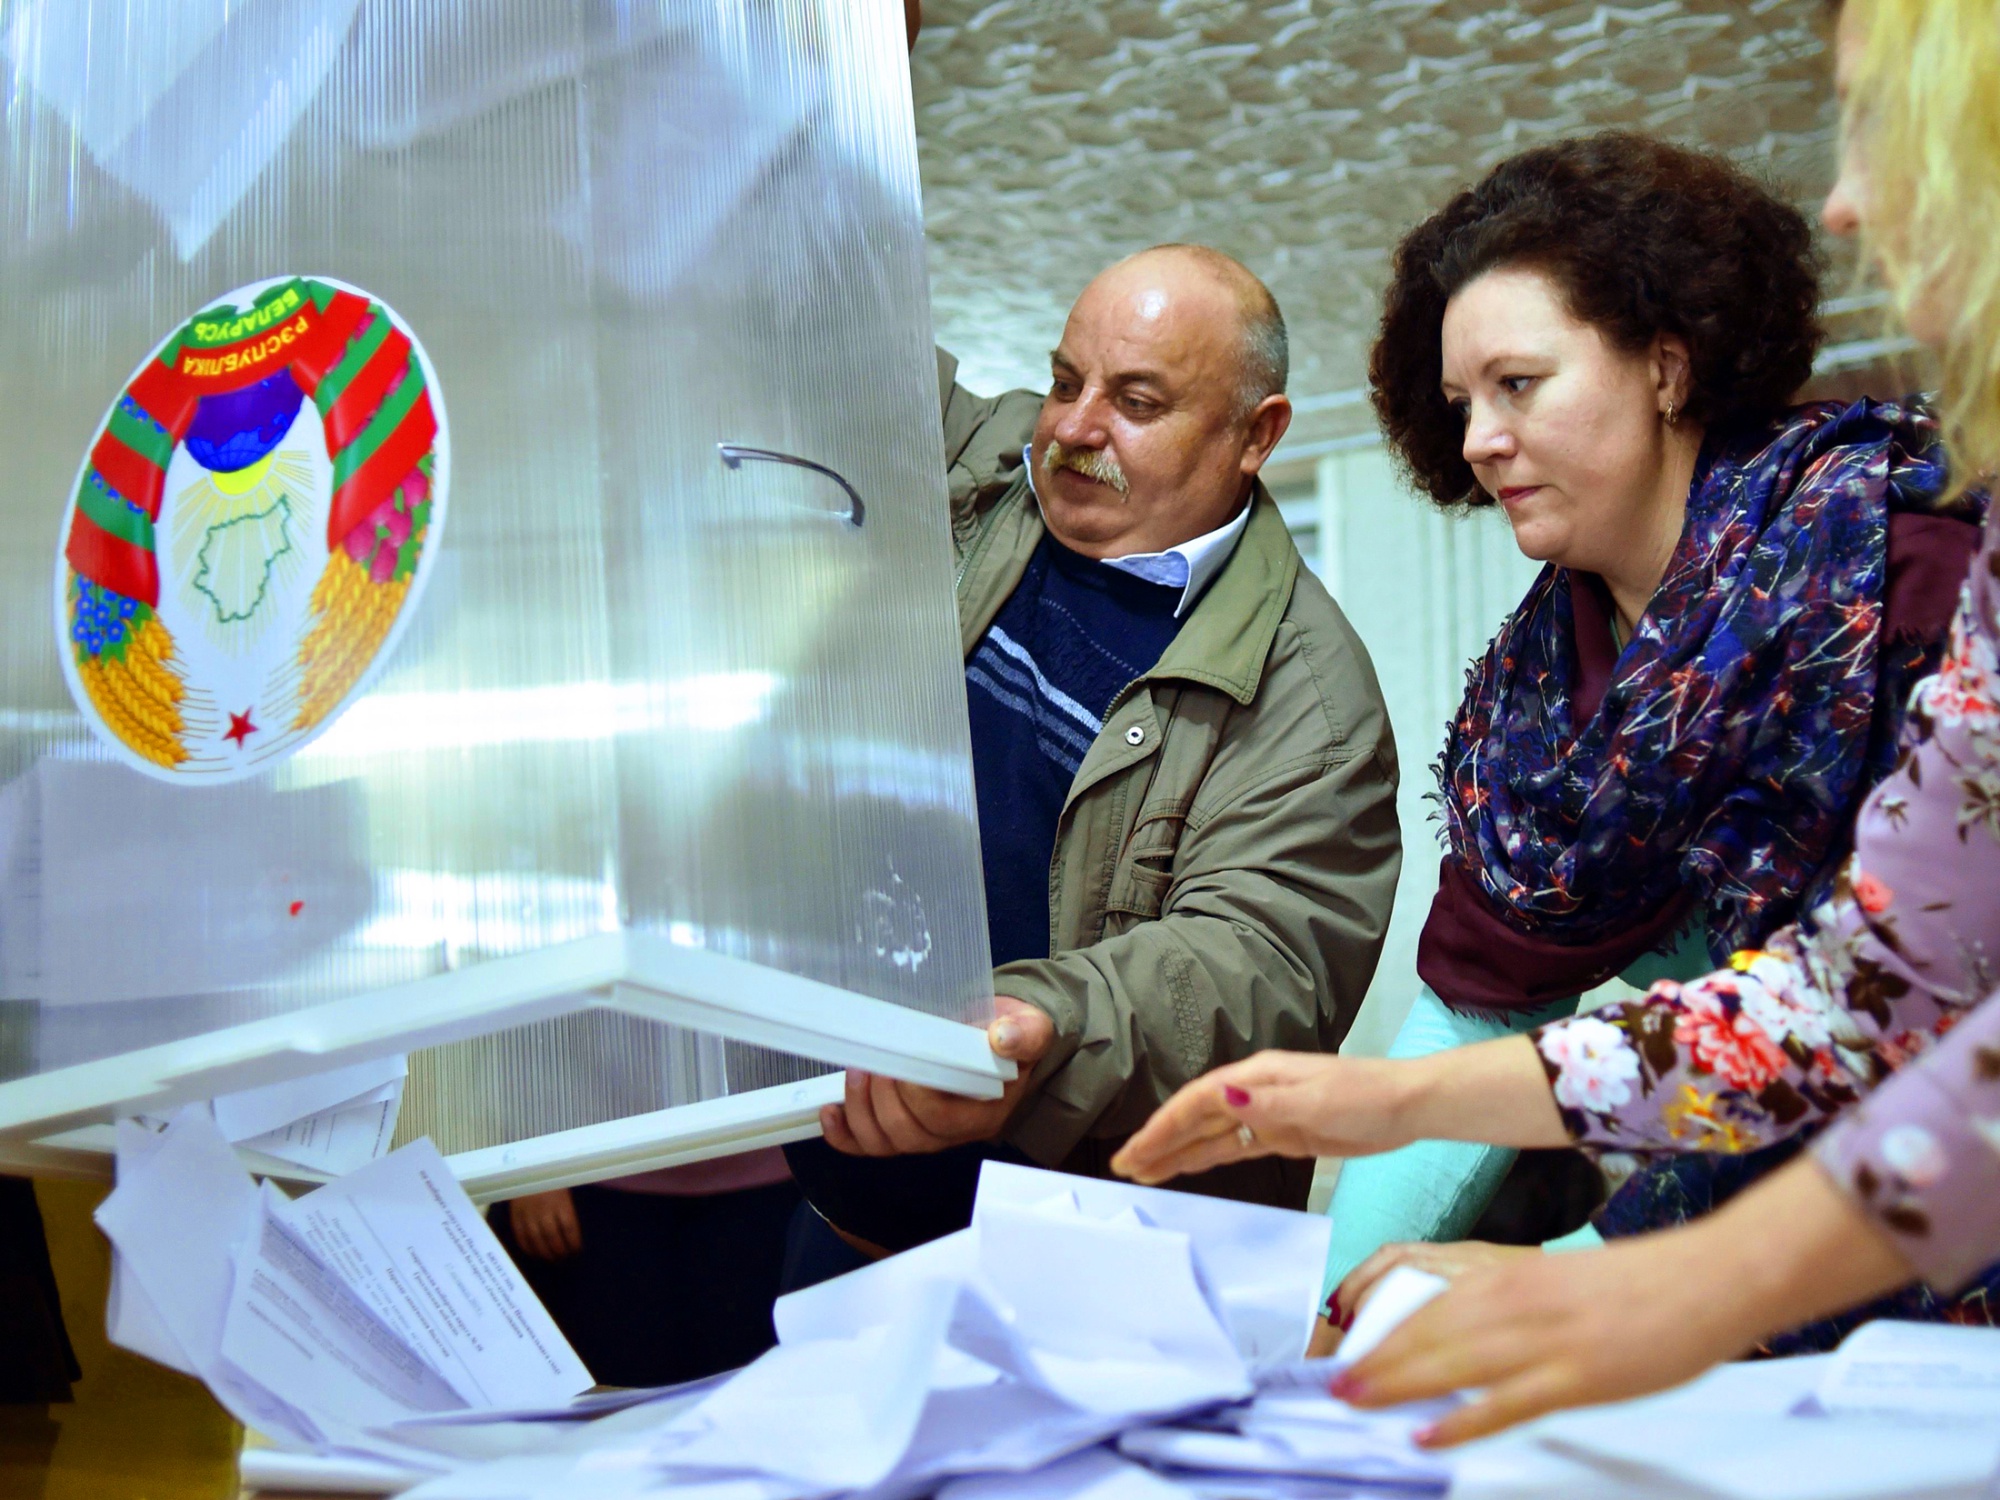 Votes are counted at a polling station in Kreva, near Minsk, Belarus, on Nov. 17.